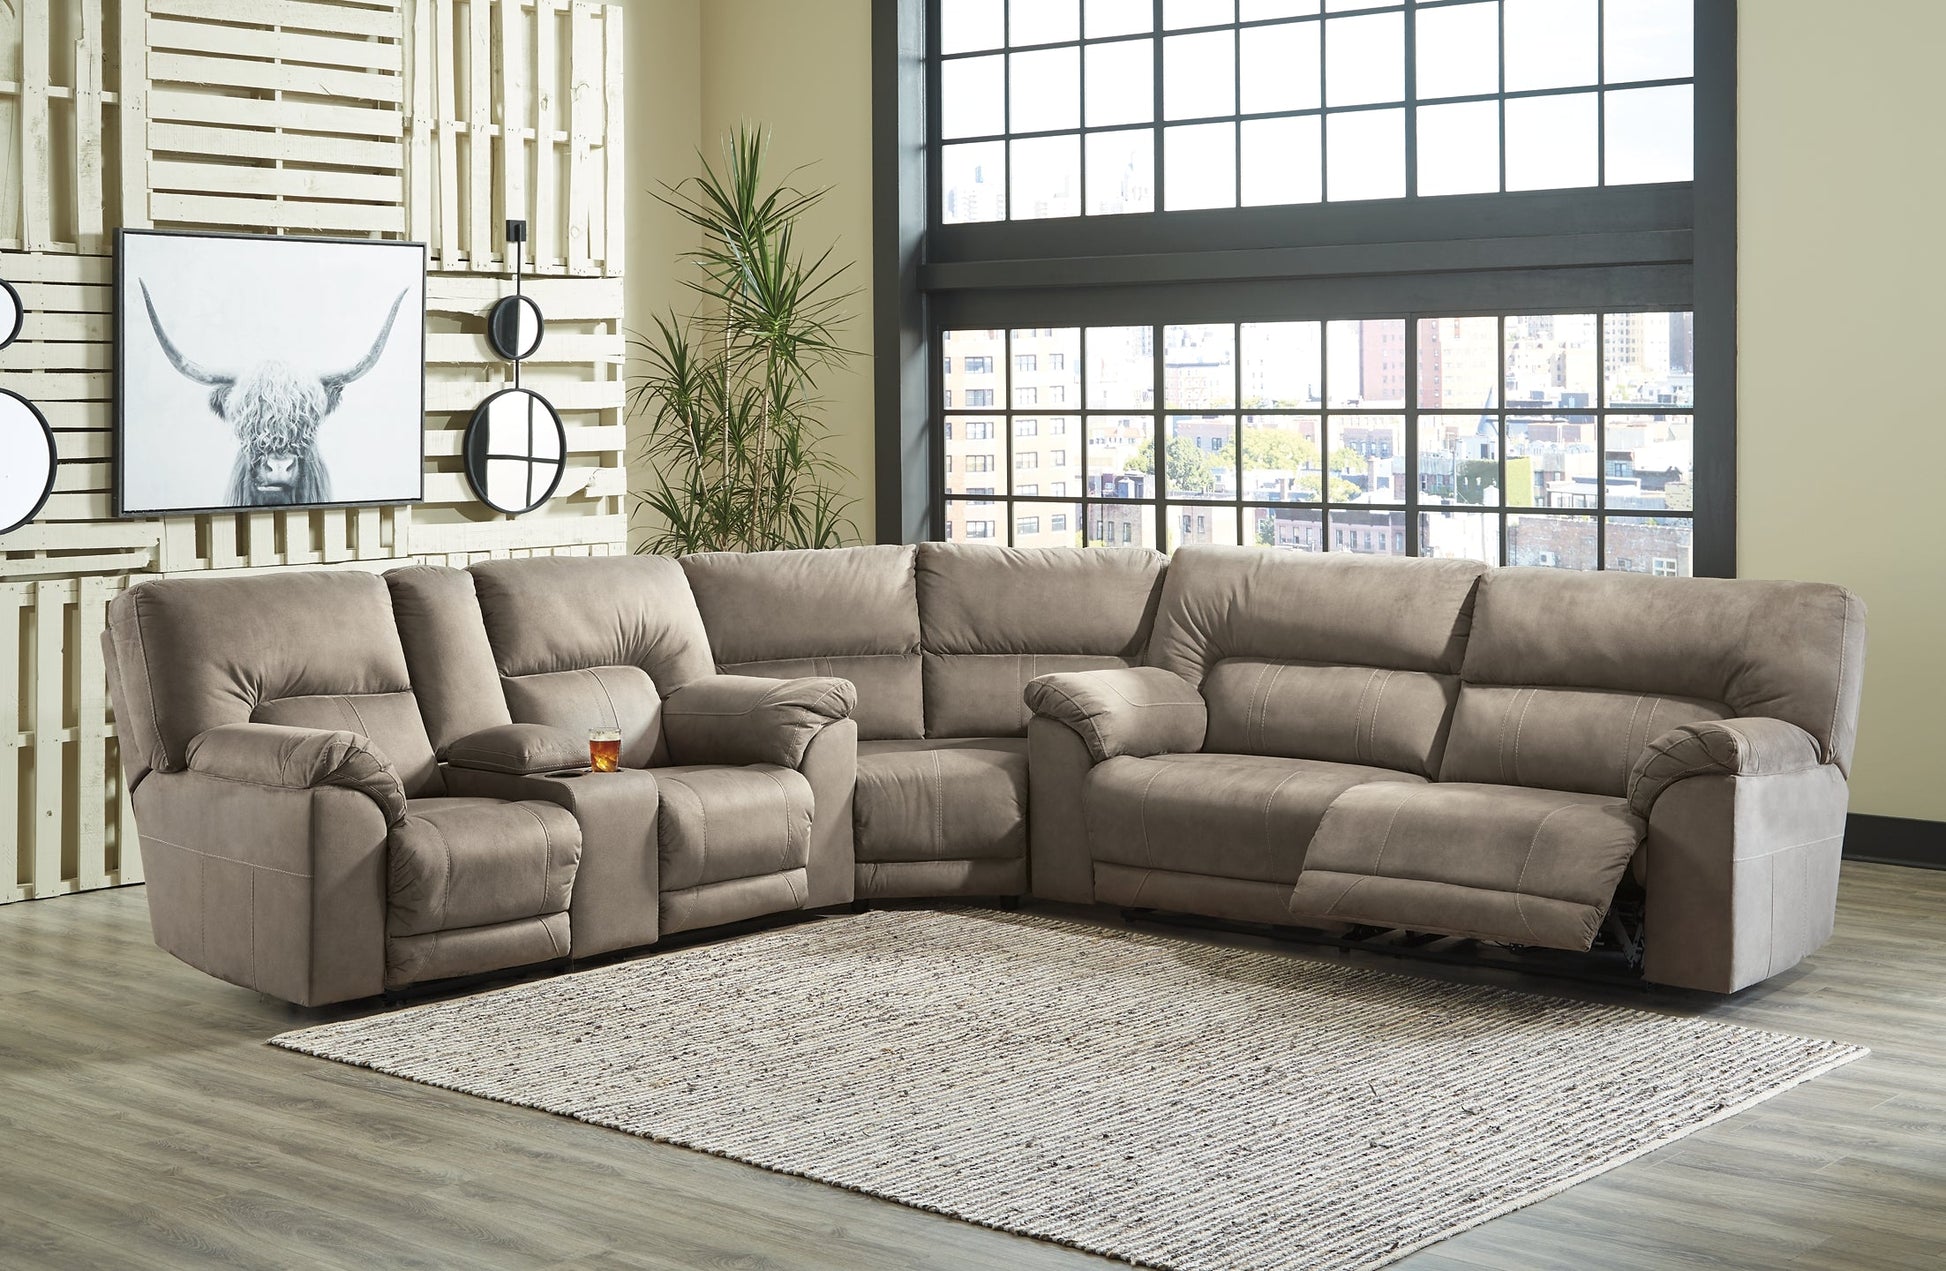 Cavalcade 3-Piece Reclining Sectional Rent Wise Rent To Own Jacksonville, Florida